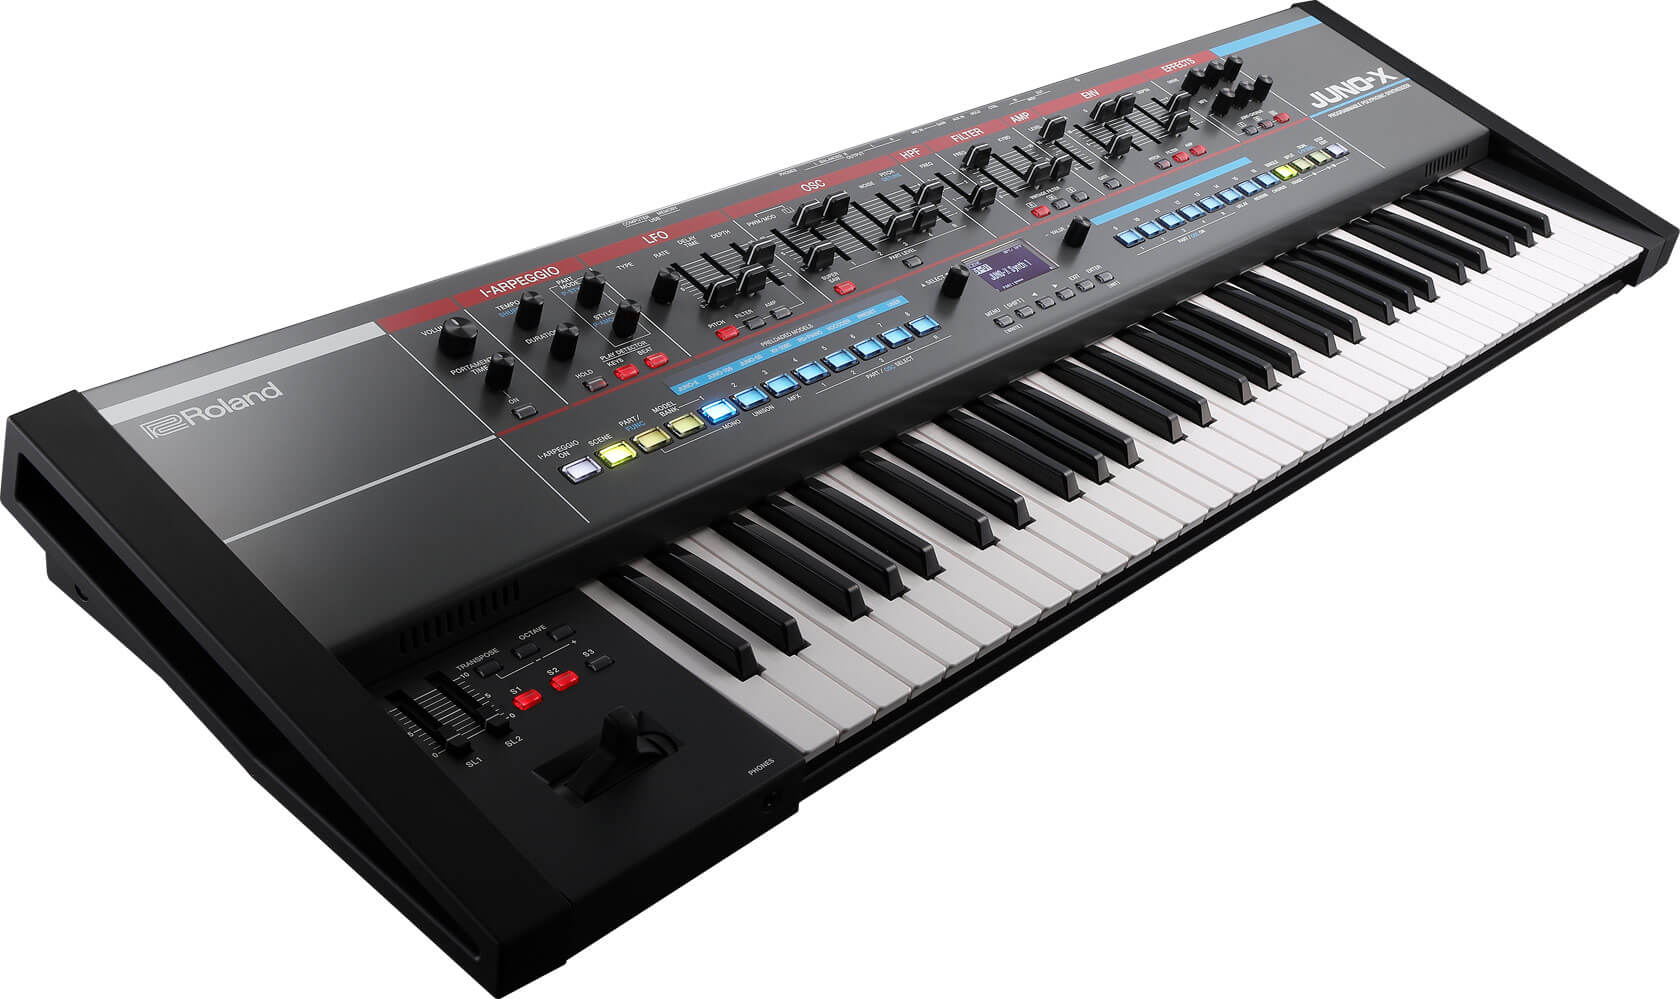 The build of the Roland JUNO-X resembles its older siblings. But Roland certainly haven